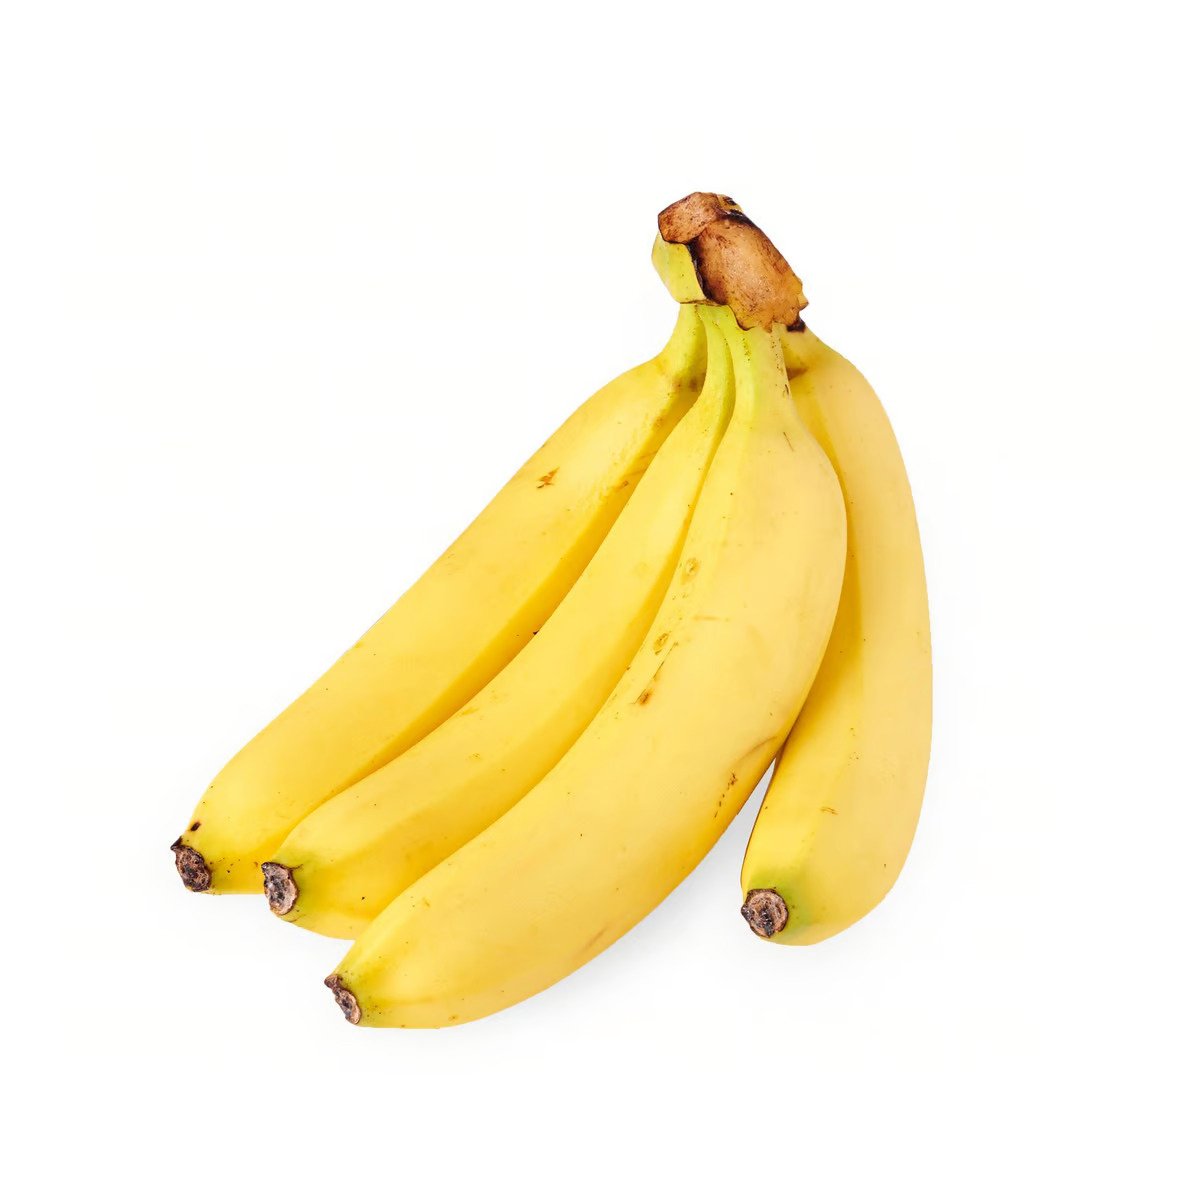 Dole Cavendish Banana 500g Approx Weight